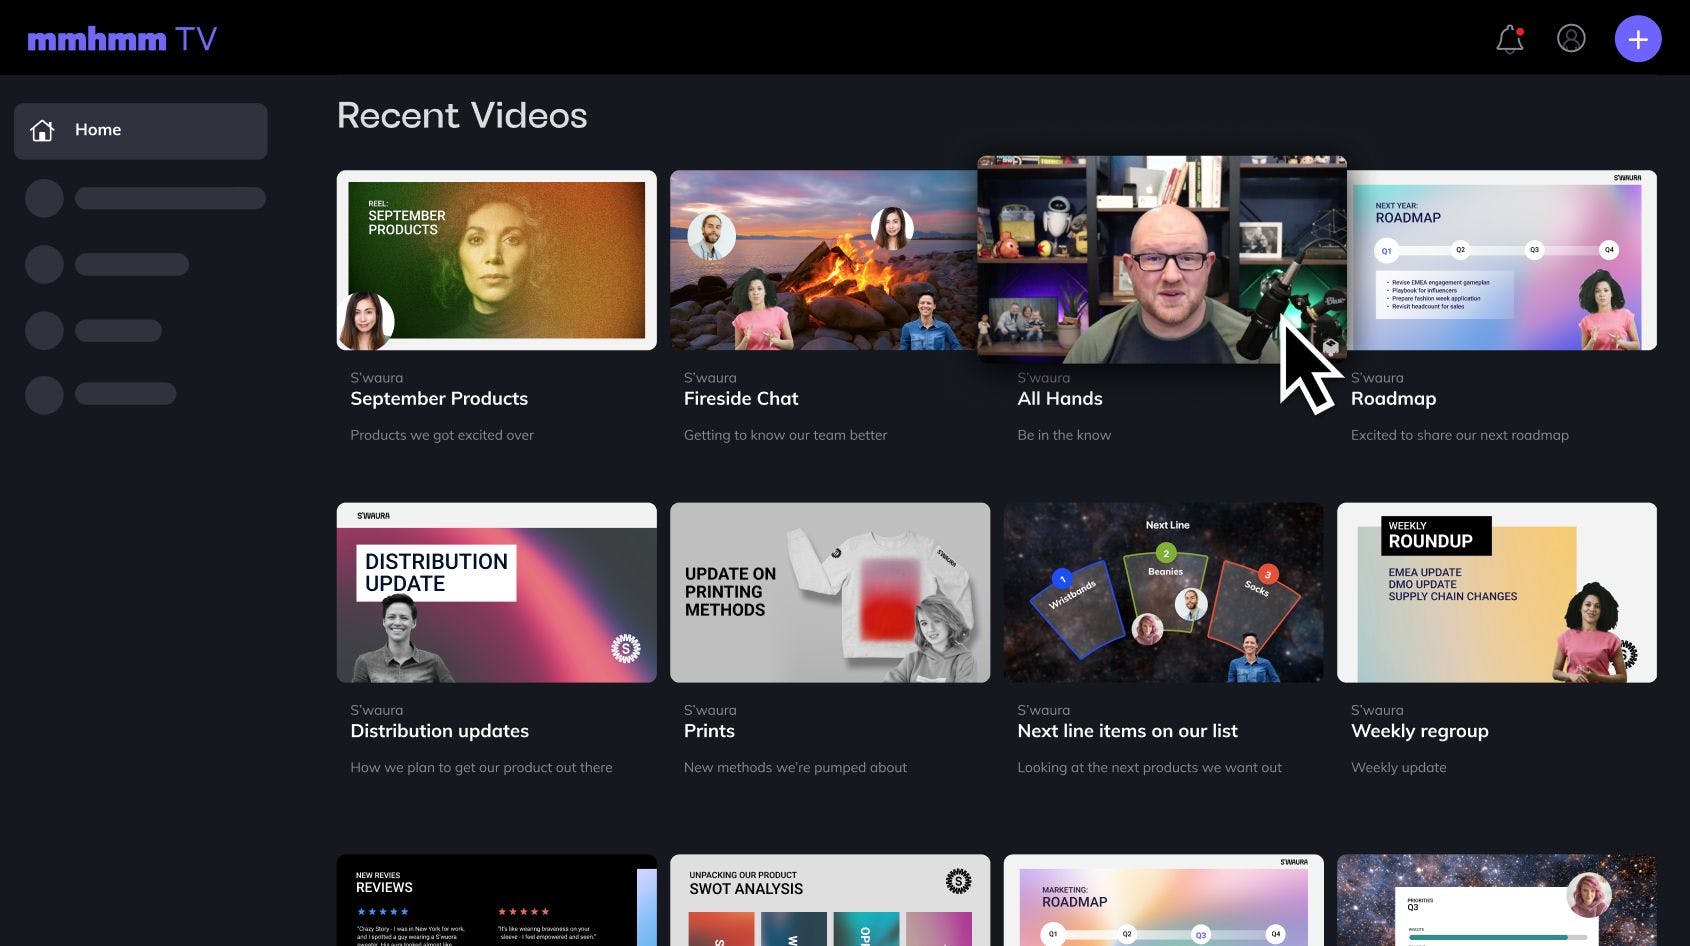 Screenshot of mmhmm TV with thumbnails of recent videos on black background